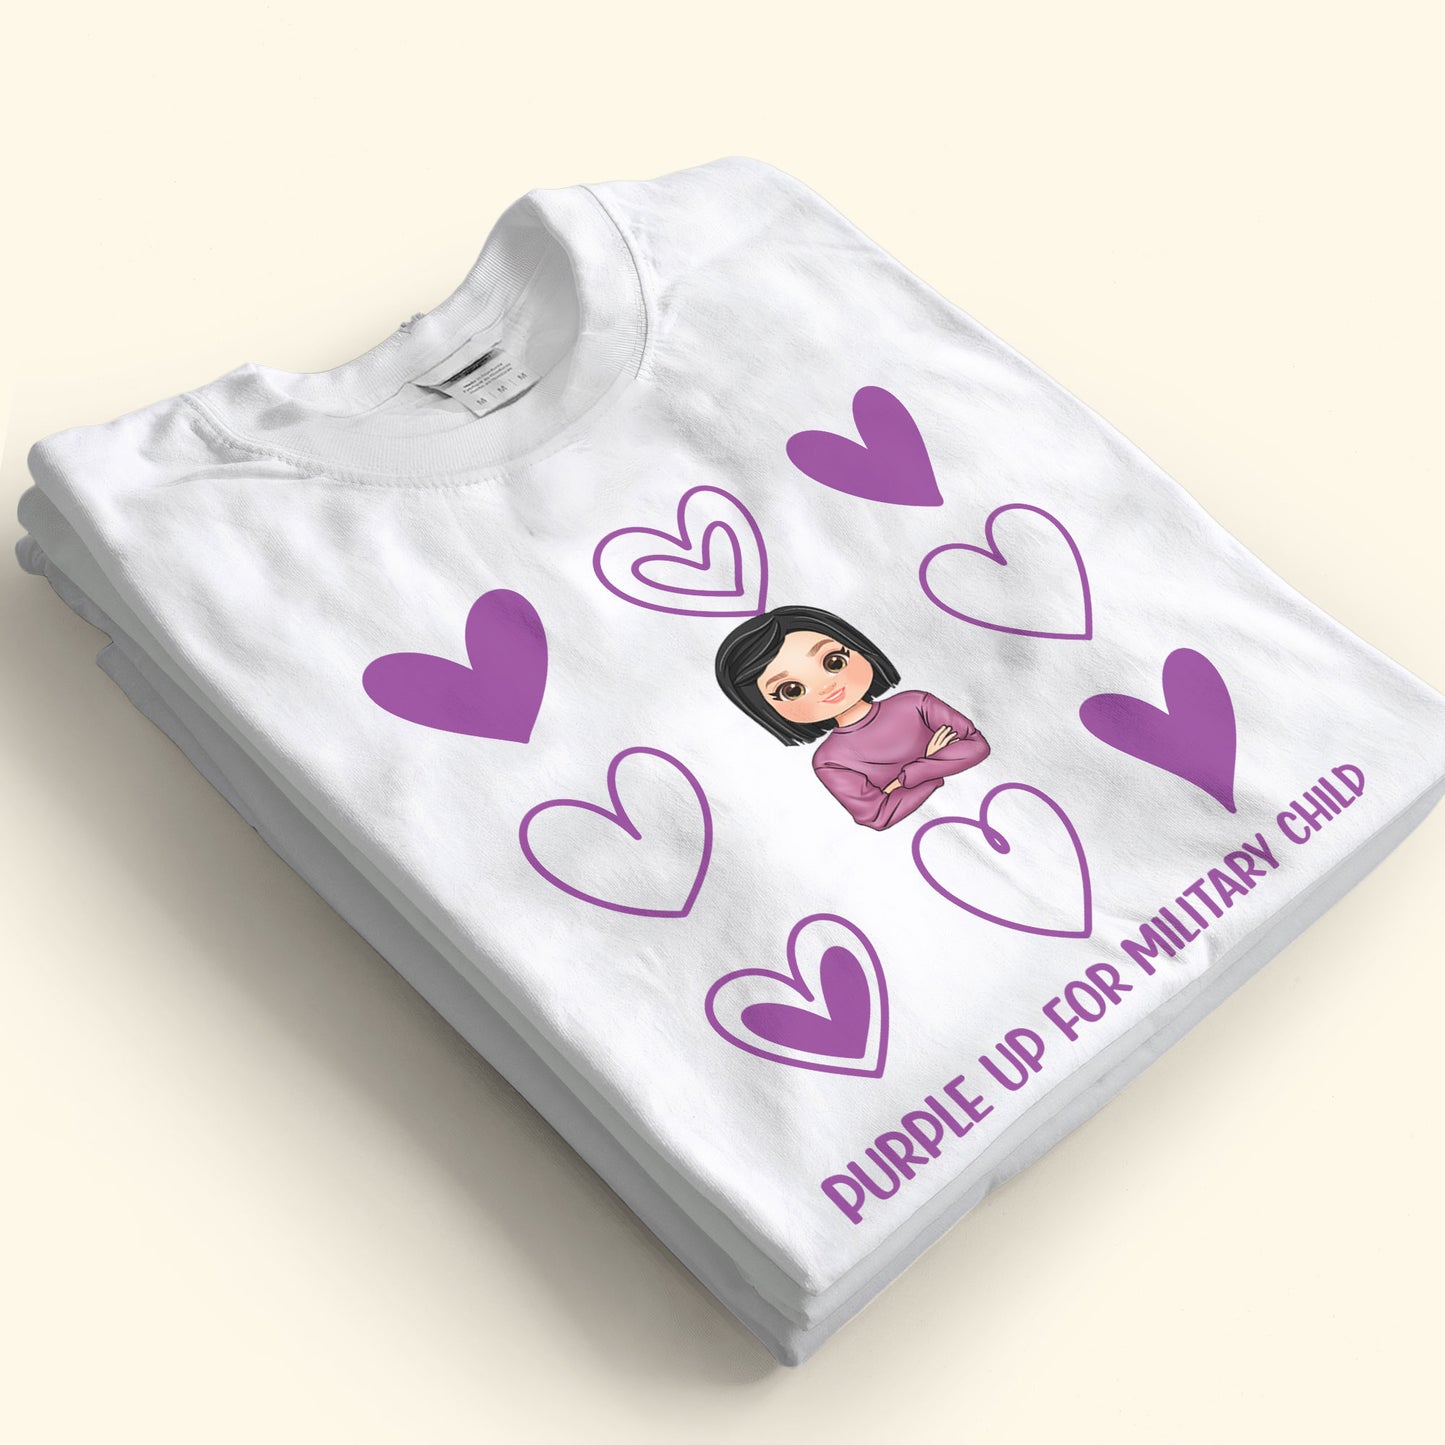 Purple Up For Military Child - Personalized Shirt